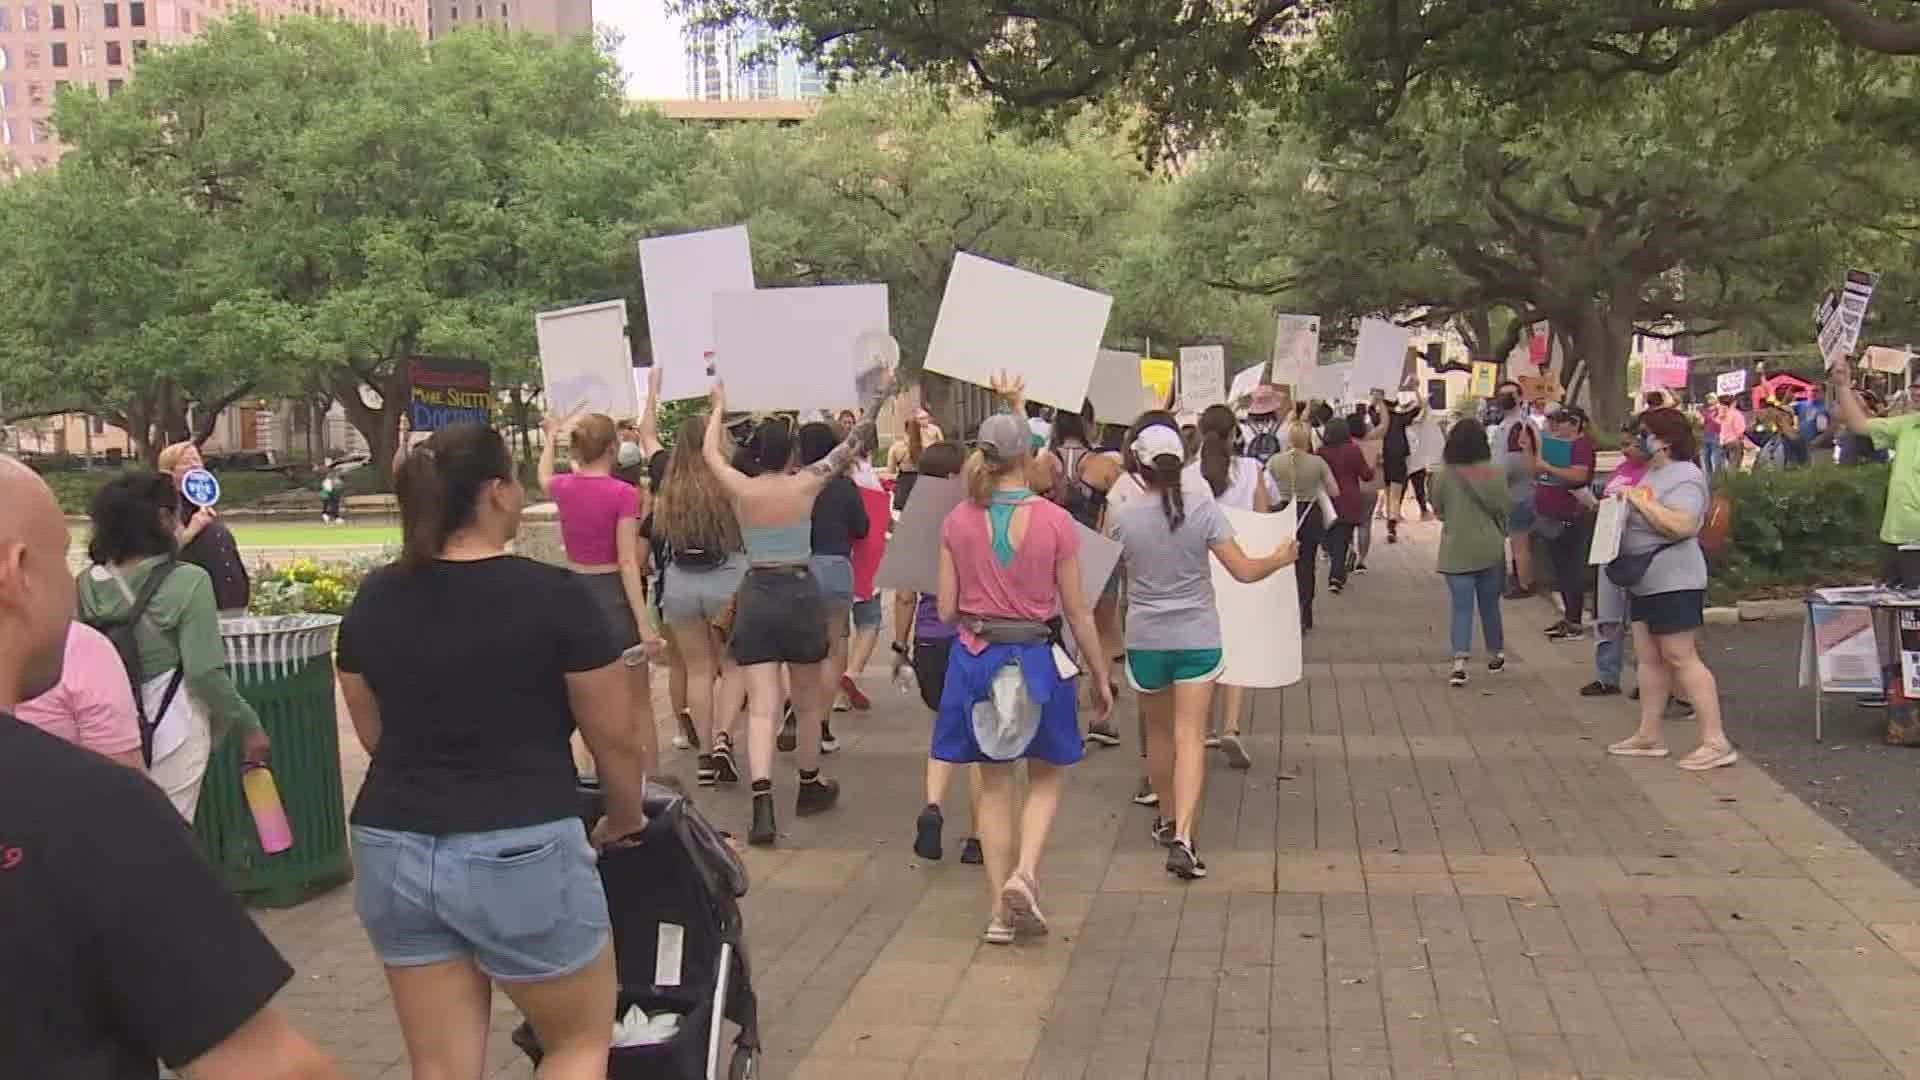 On Saturday, dozens of protestors took to the steps of Houston's City Hall for a "Bans off our Bodies” rally.